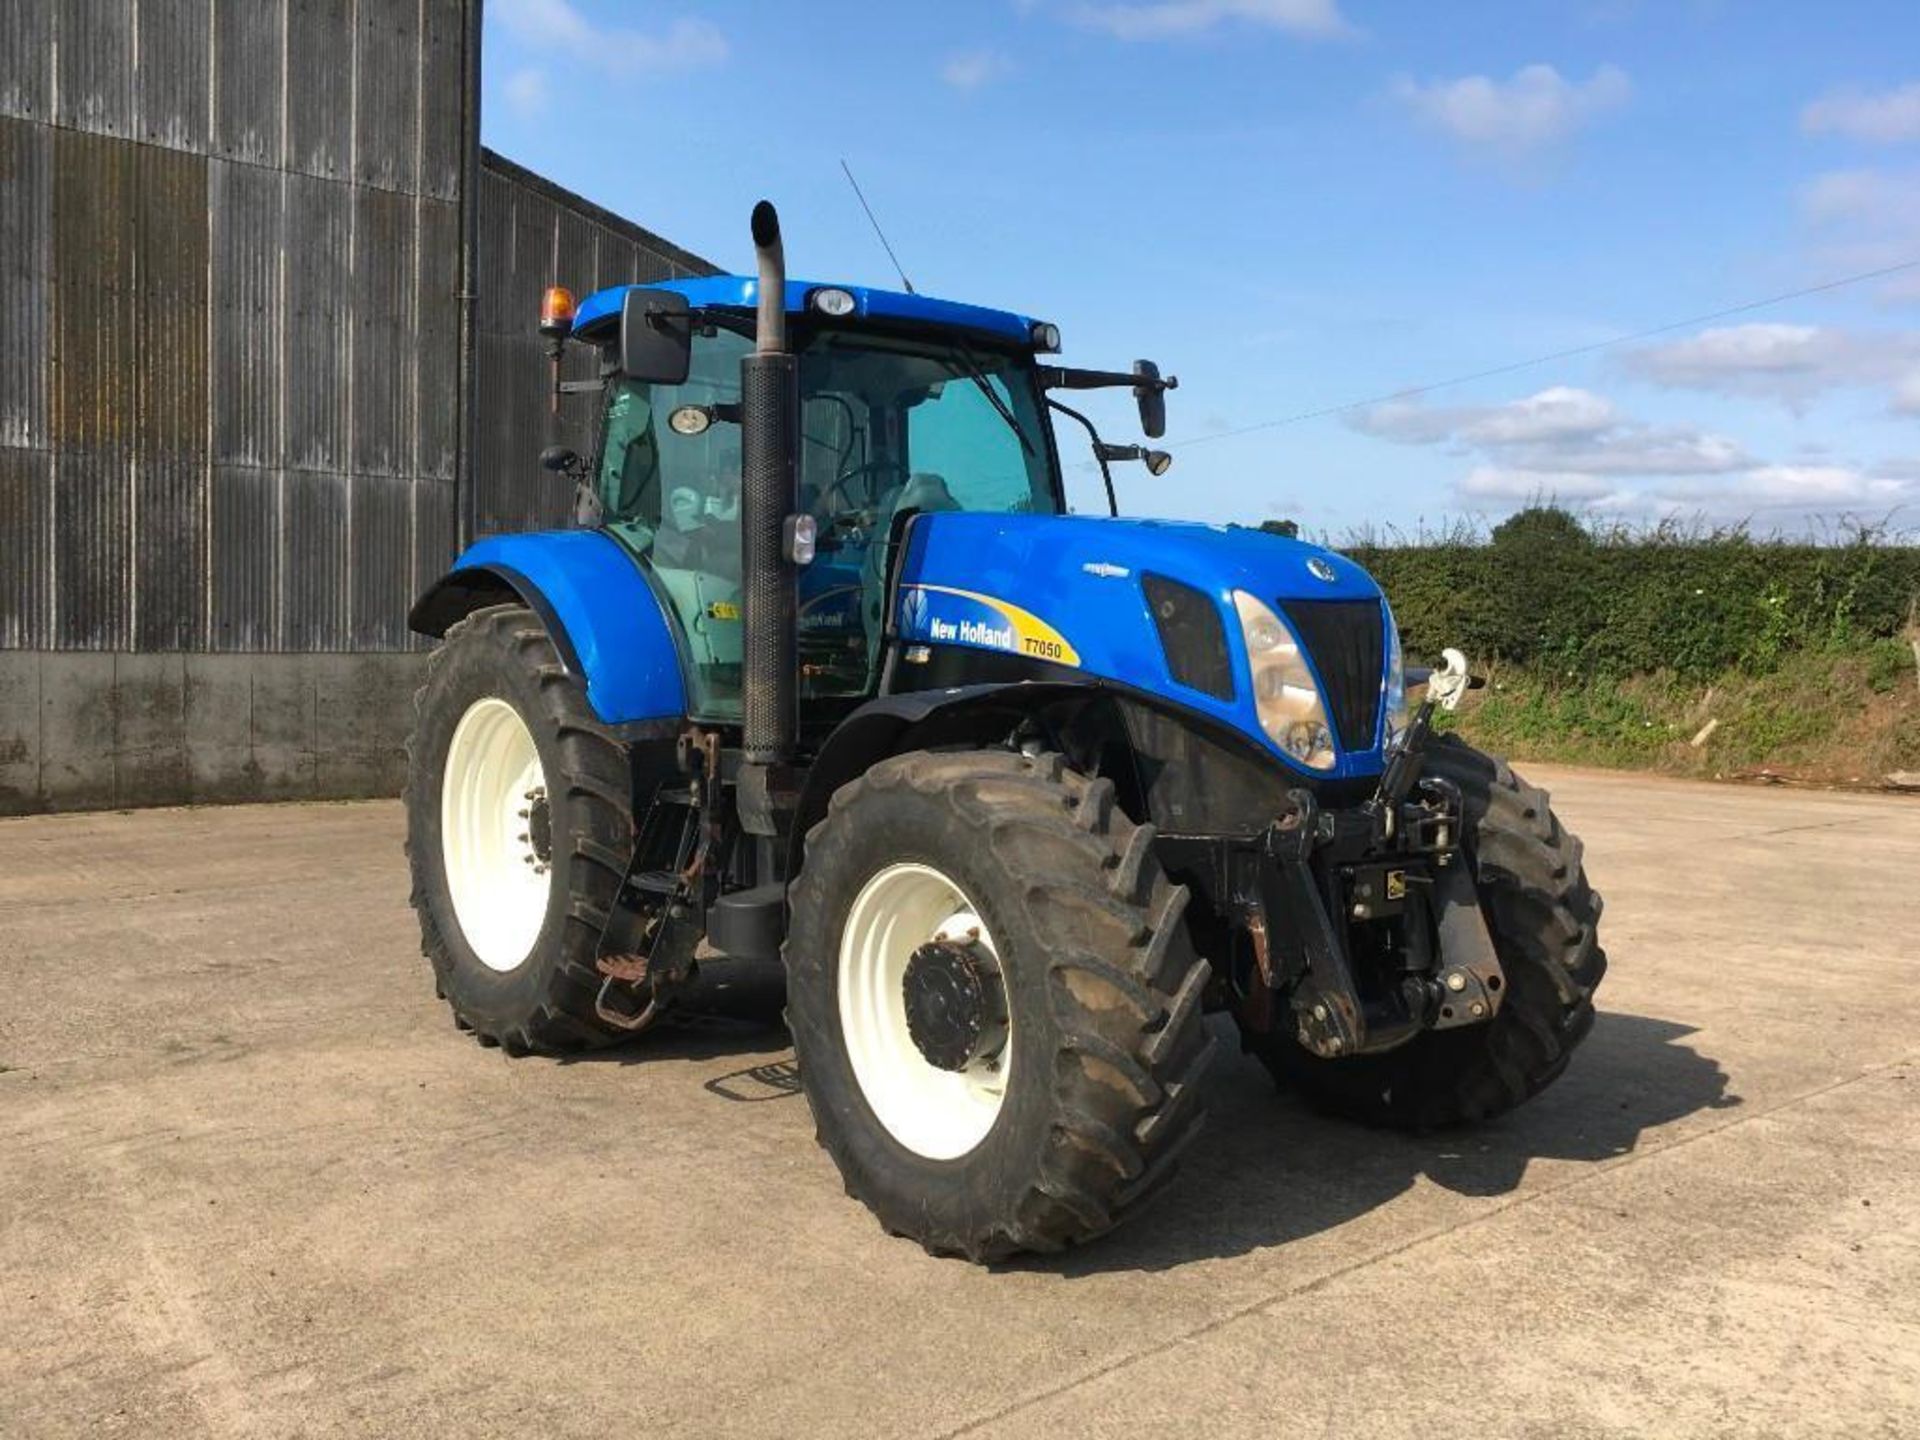 2011 New Holland T7050 Auto Command 4wd tractor with air brakes, front linkage, air seat, - Image 4 of 15